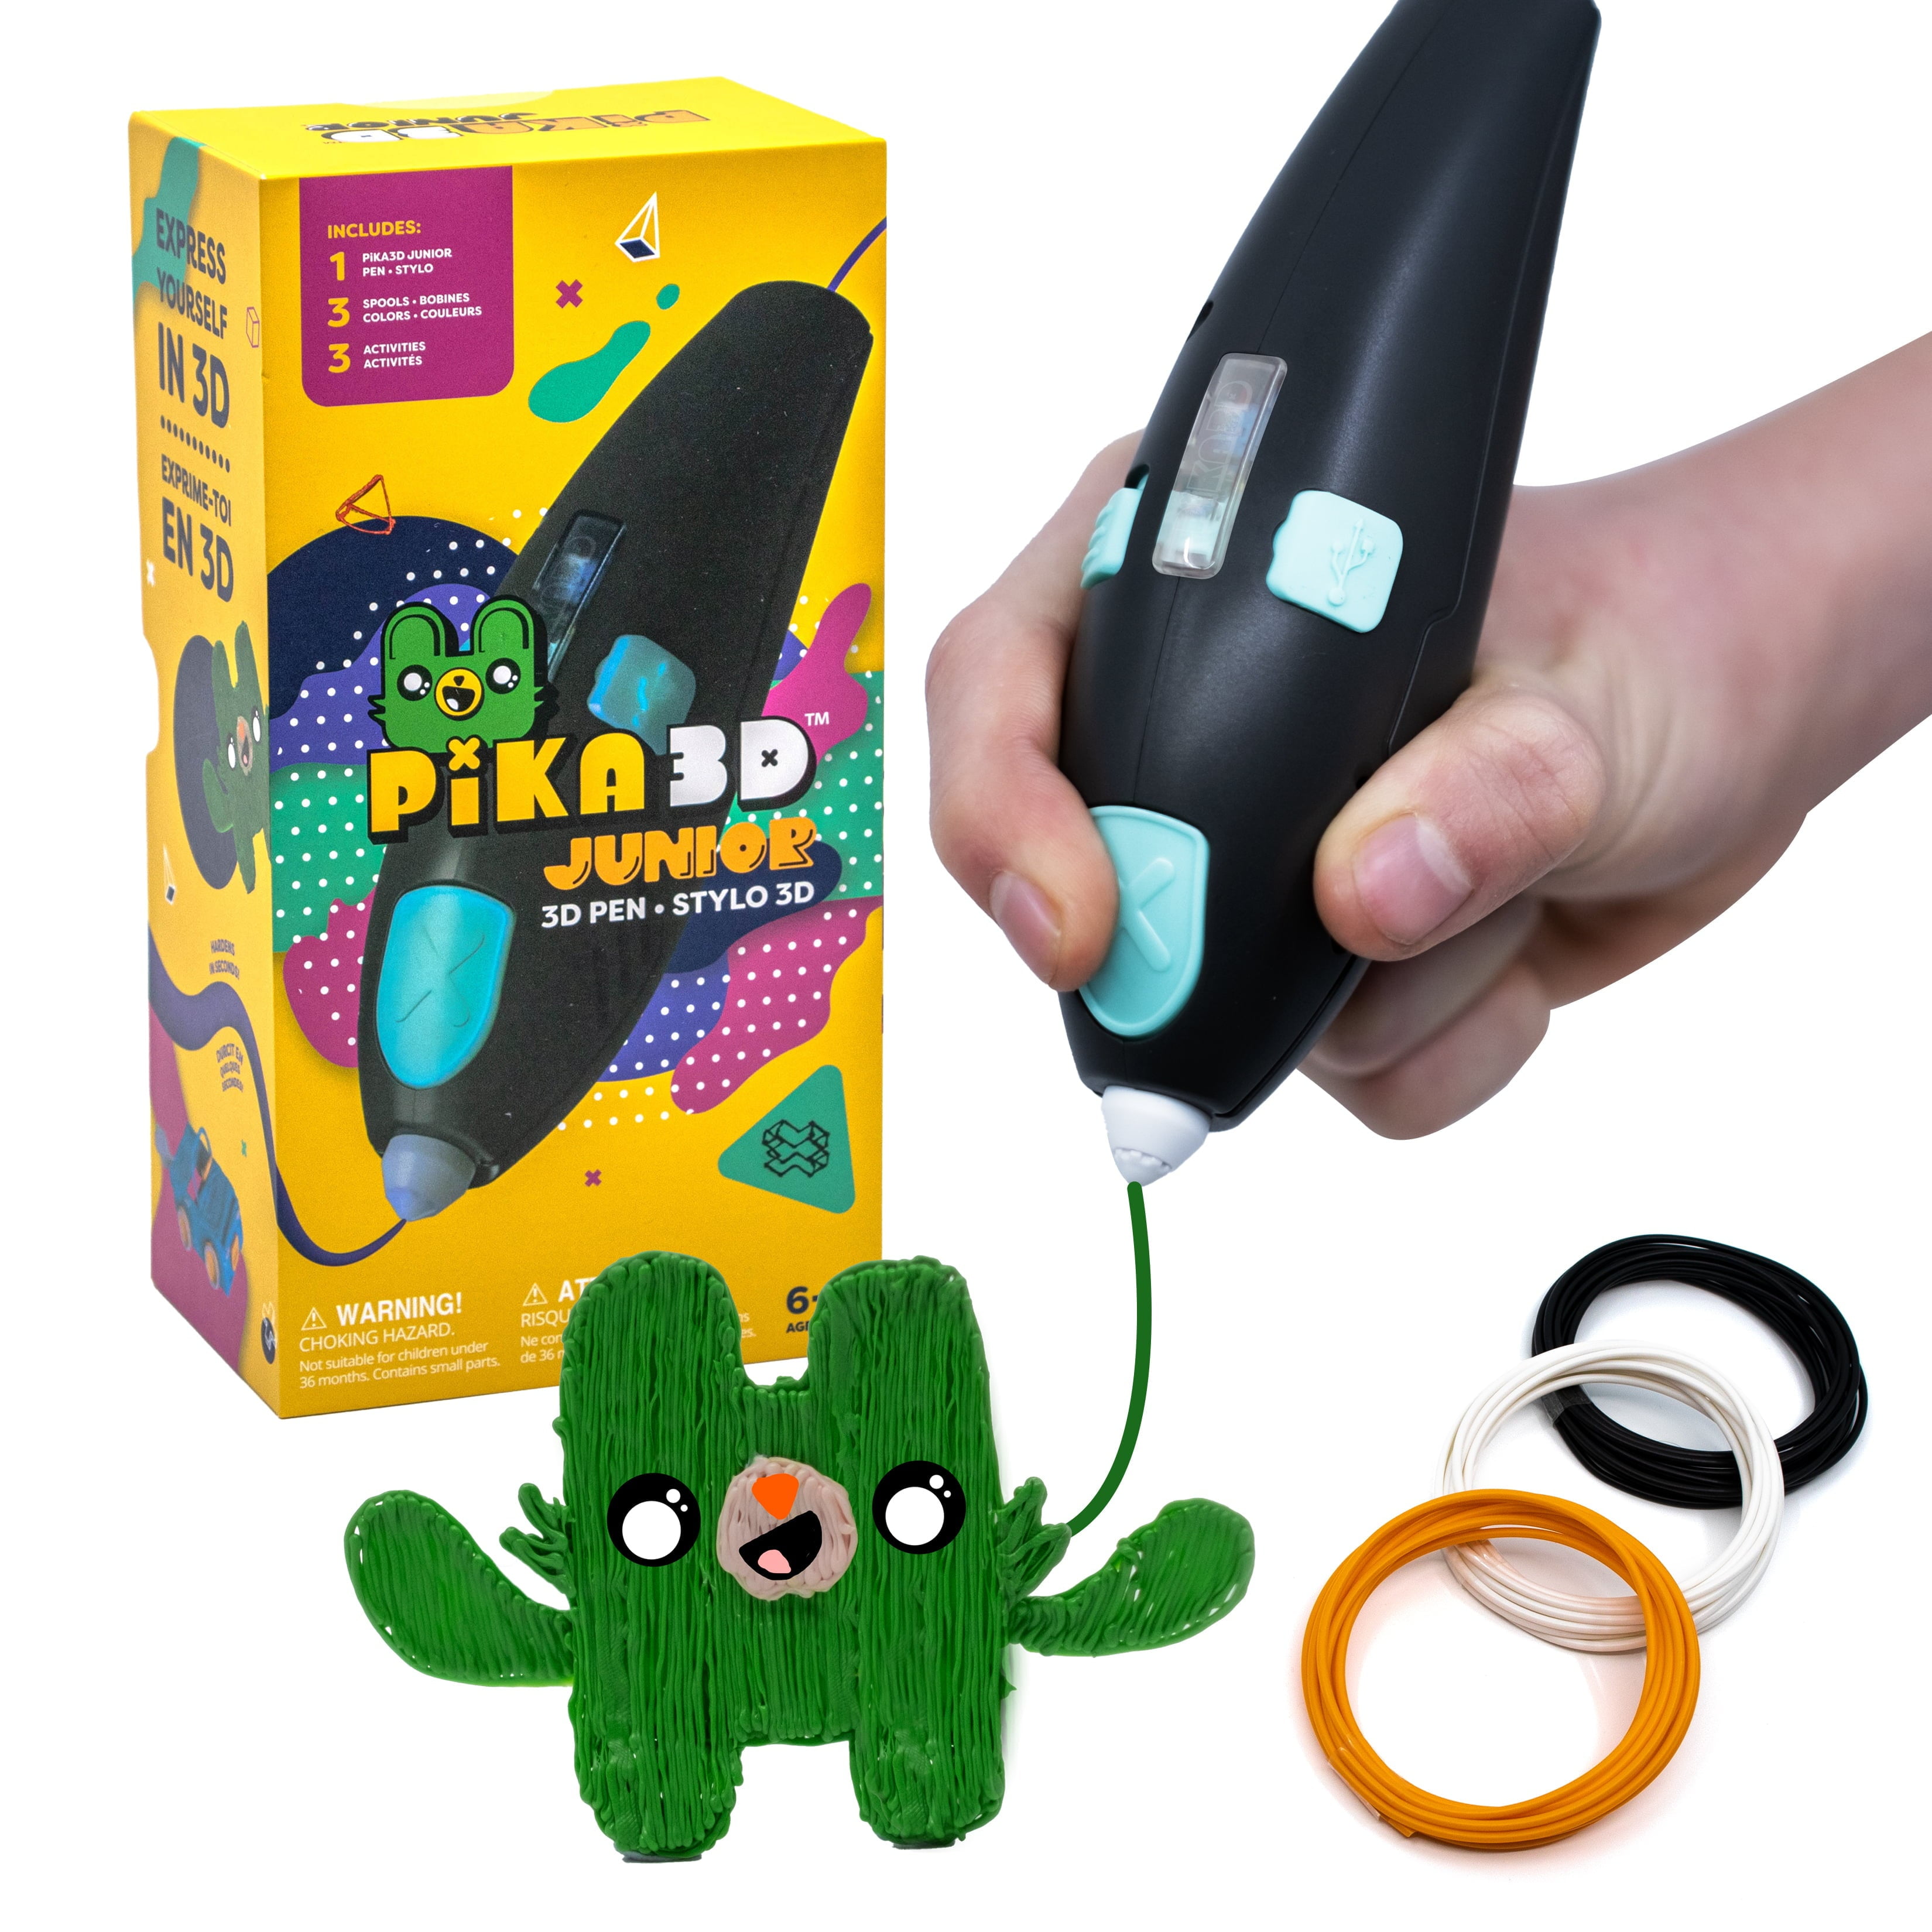 PiKA3D Junior 3D Printing Pen for Kids - Ready to use and Child safe 3D with no hot parts, Refills Included - Walmart.com